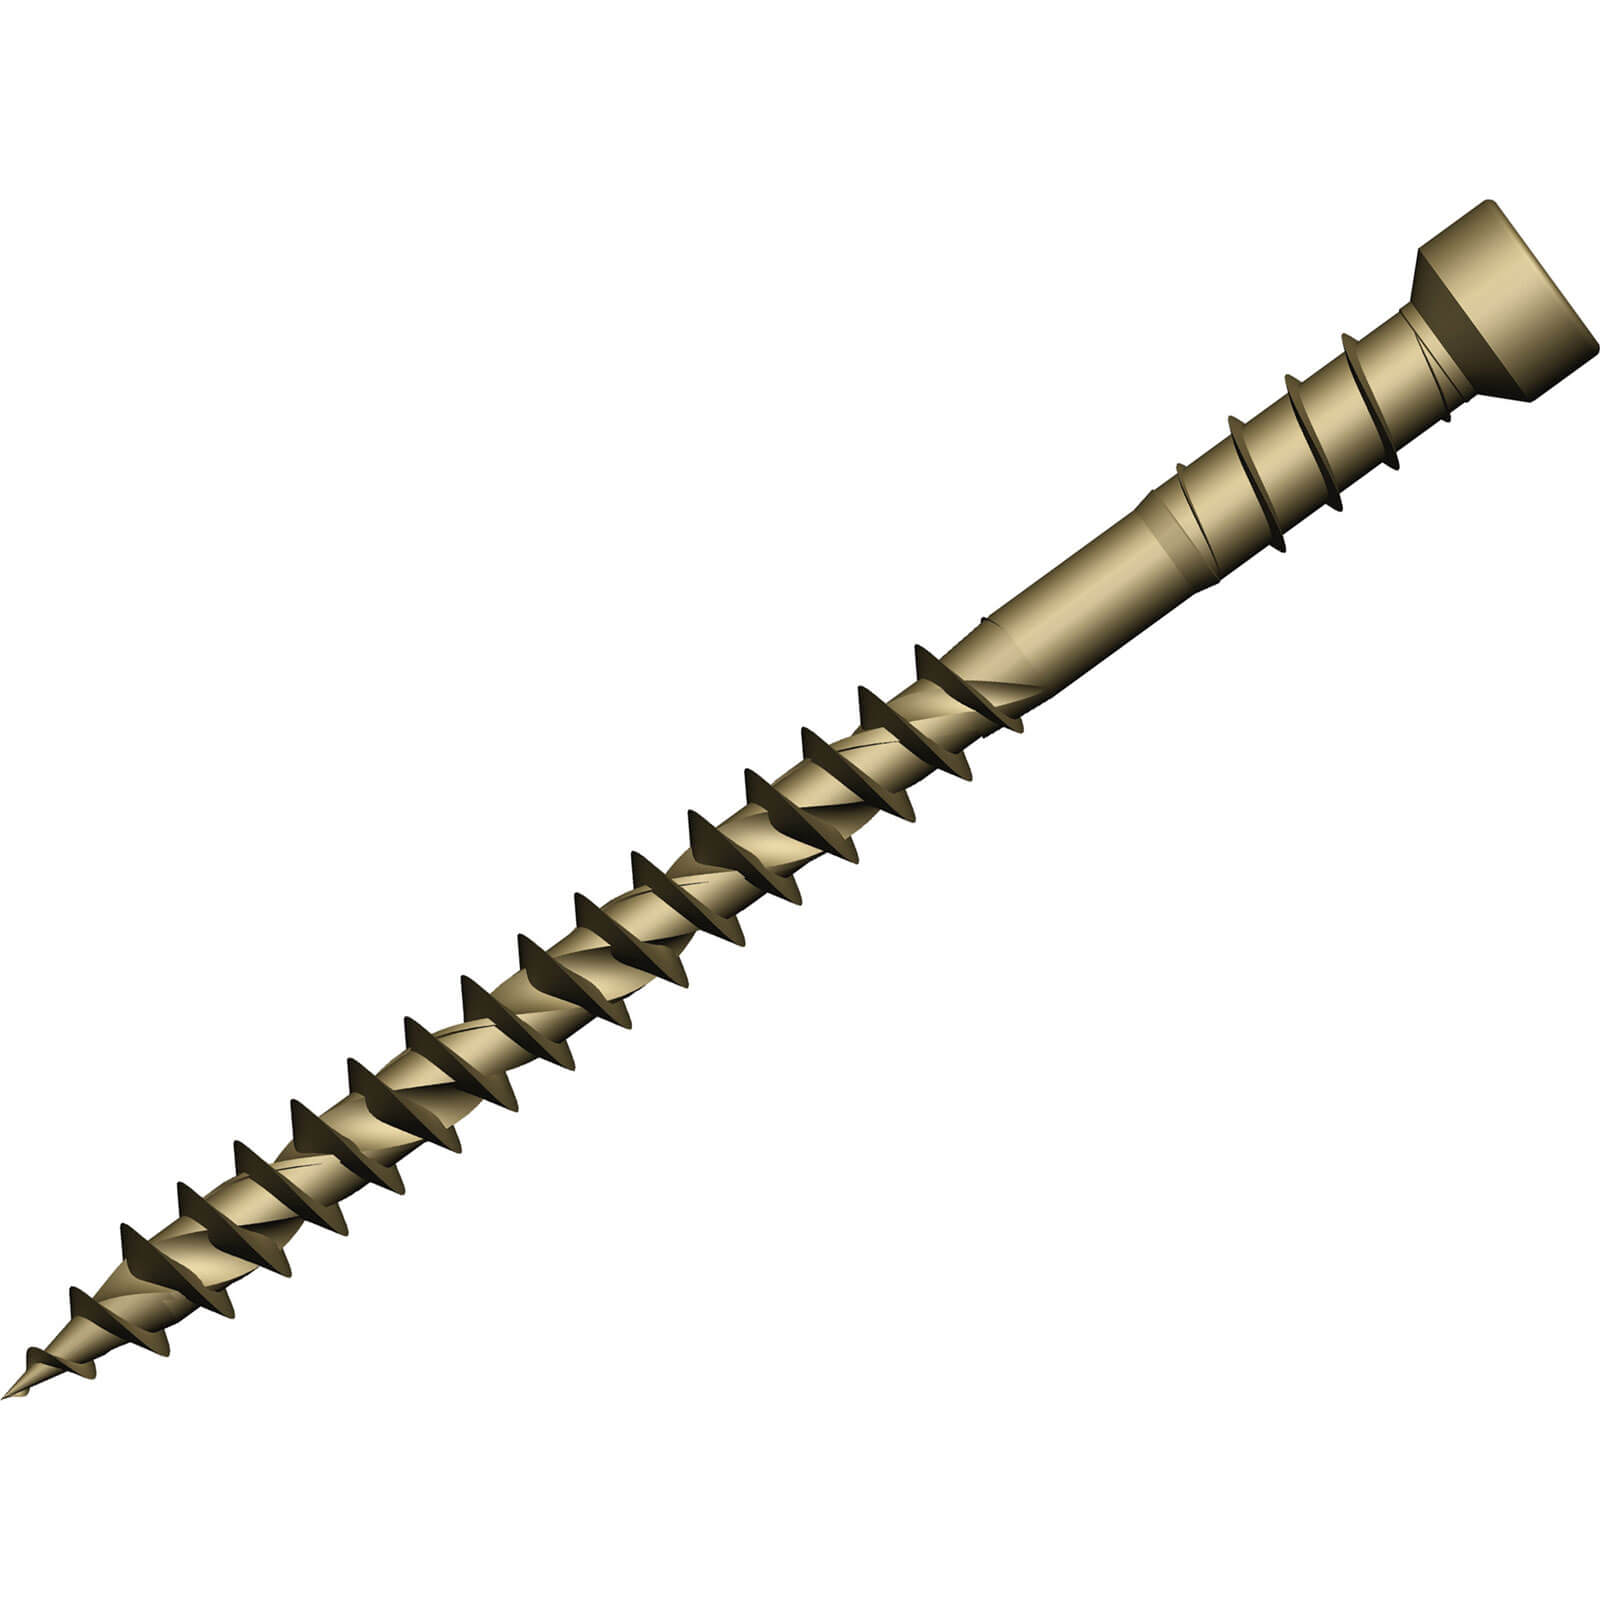 Image of Forgefix Reduced Head Torx Decking Screws Tan 4.5mm 50mm Pack of 600